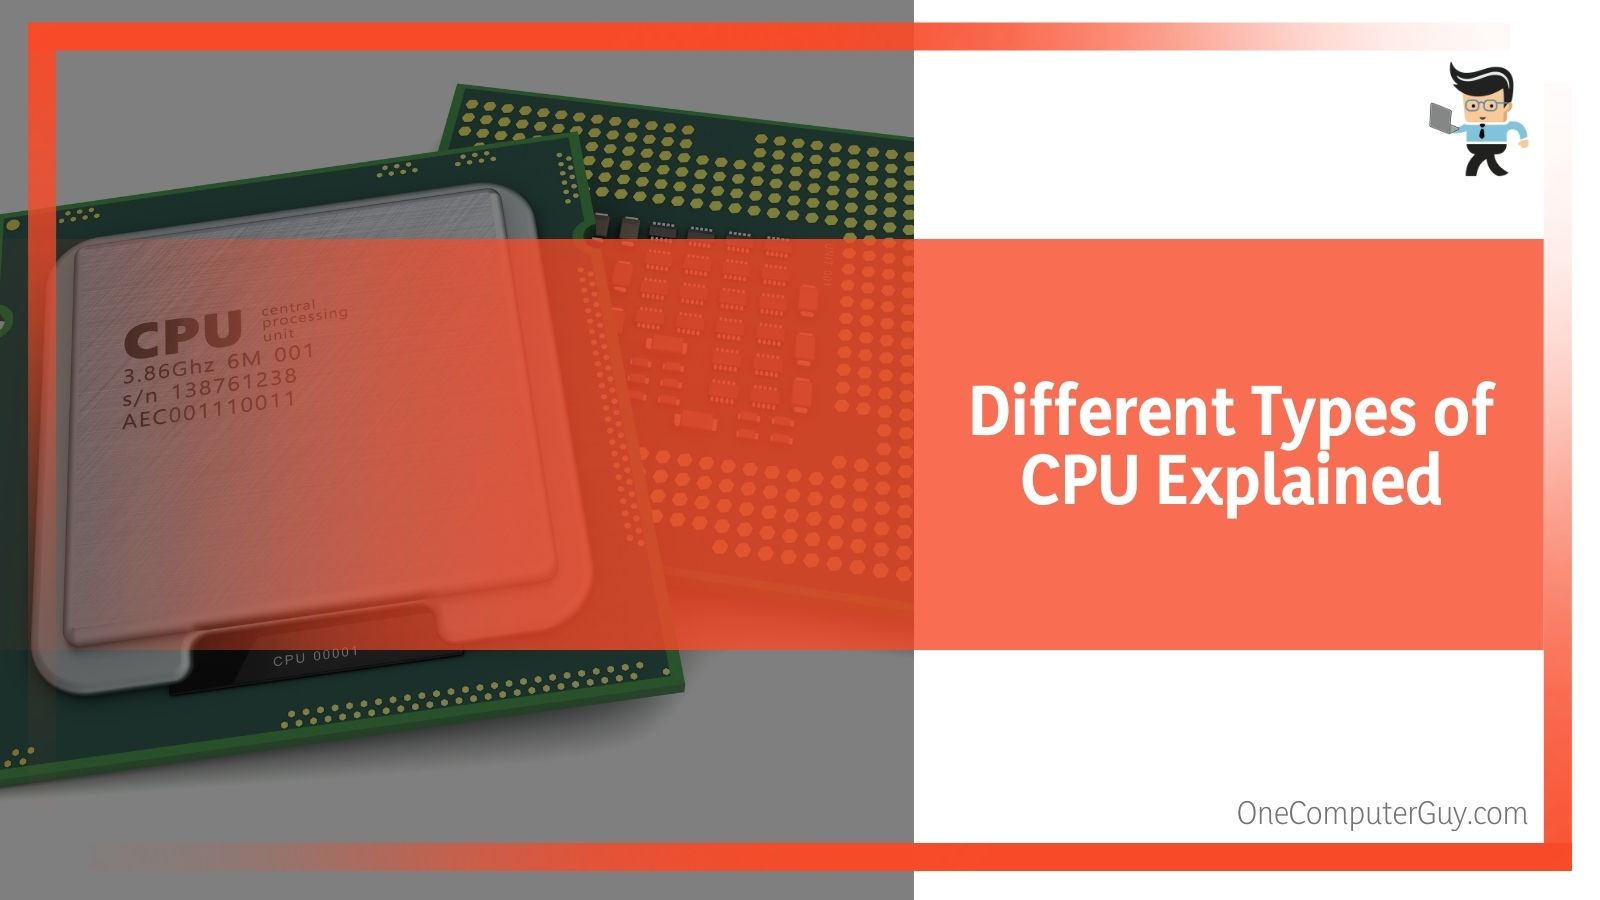 Different Types of CPU Explained